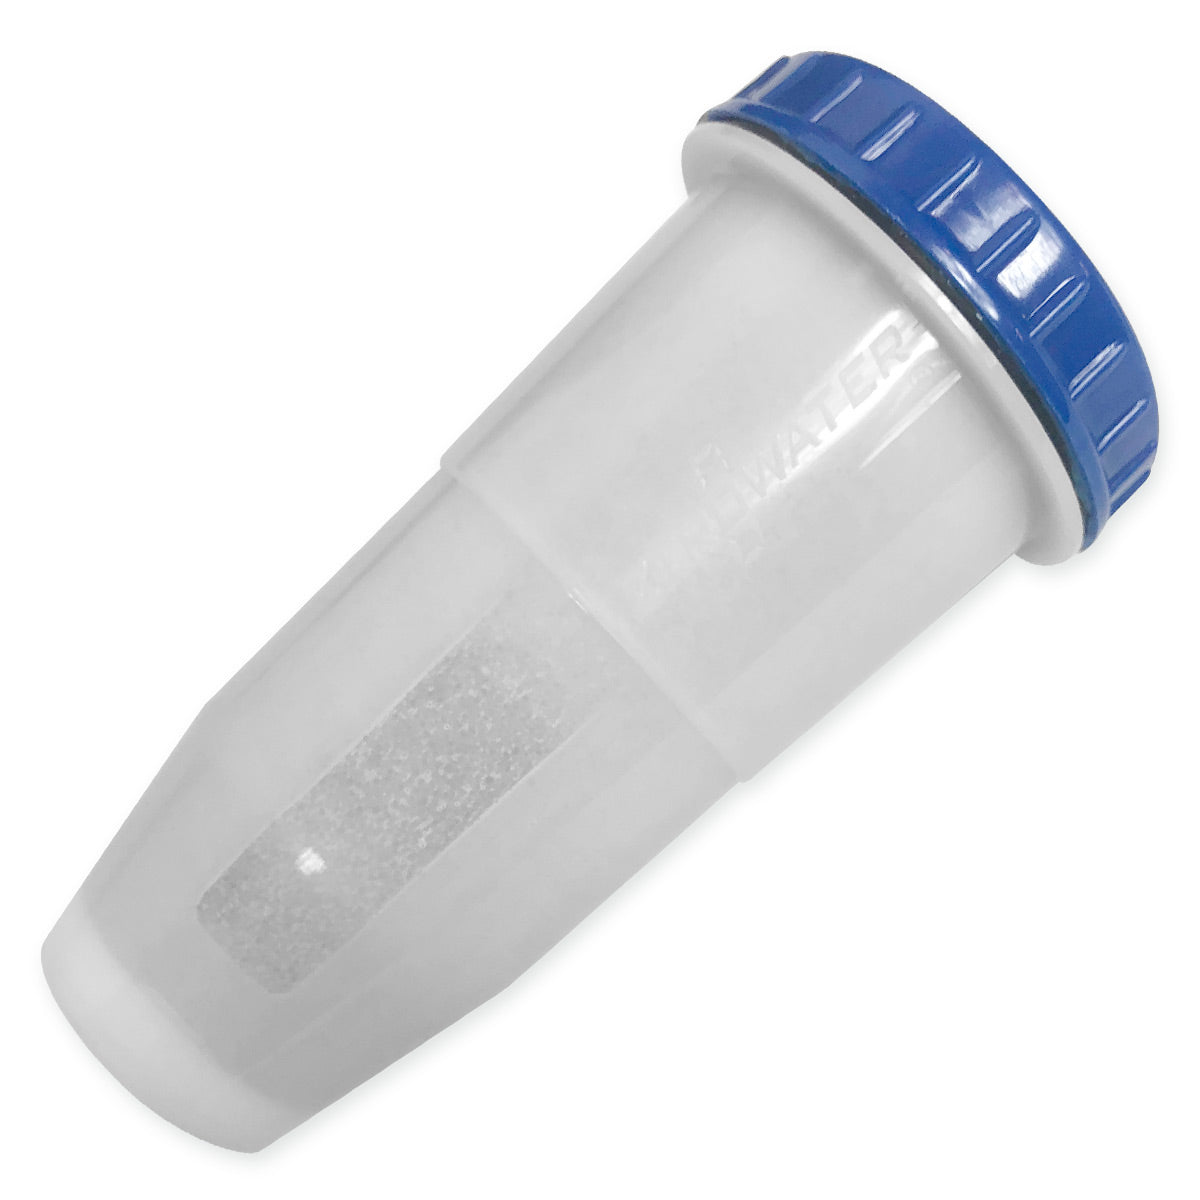 Water Filter Cartridge for Transcend 365 Series miniCPAP Machines - DISCONTINUED